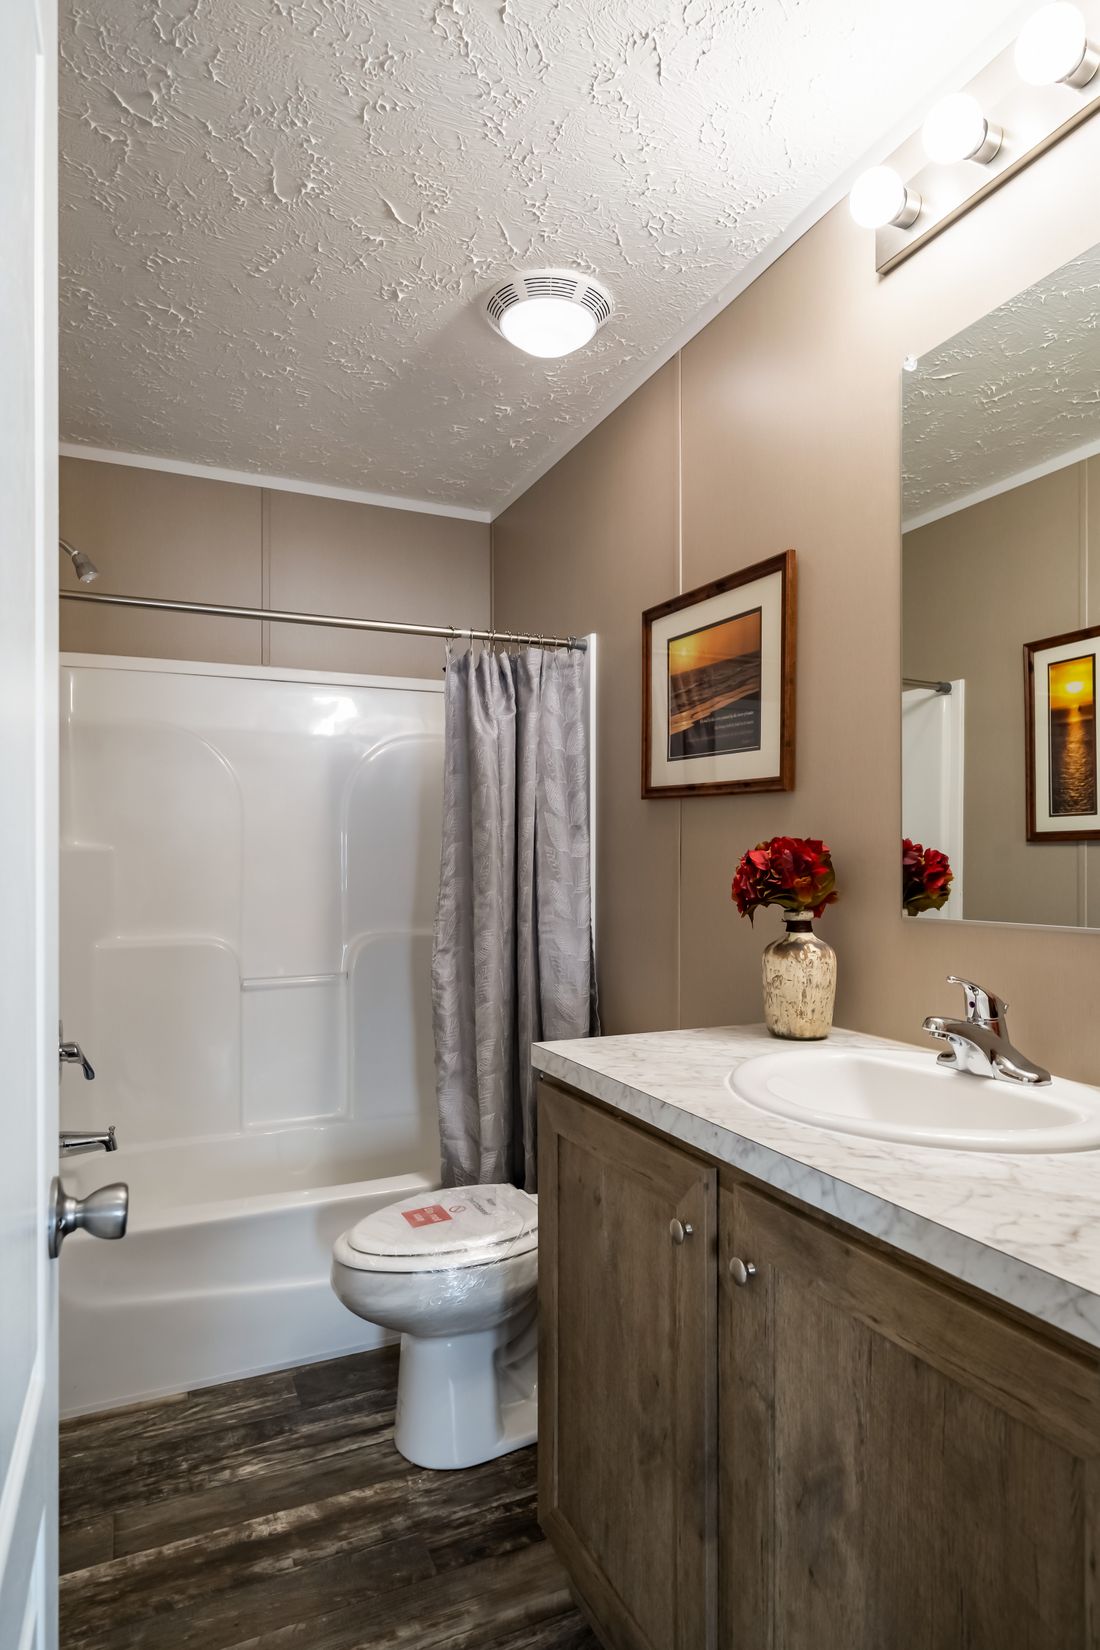 The ULTRA EXCEL 3 BR 28X60 Guest Bathroom. This Manufactured Mobile Home features 3 bedrooms and 2 baths.